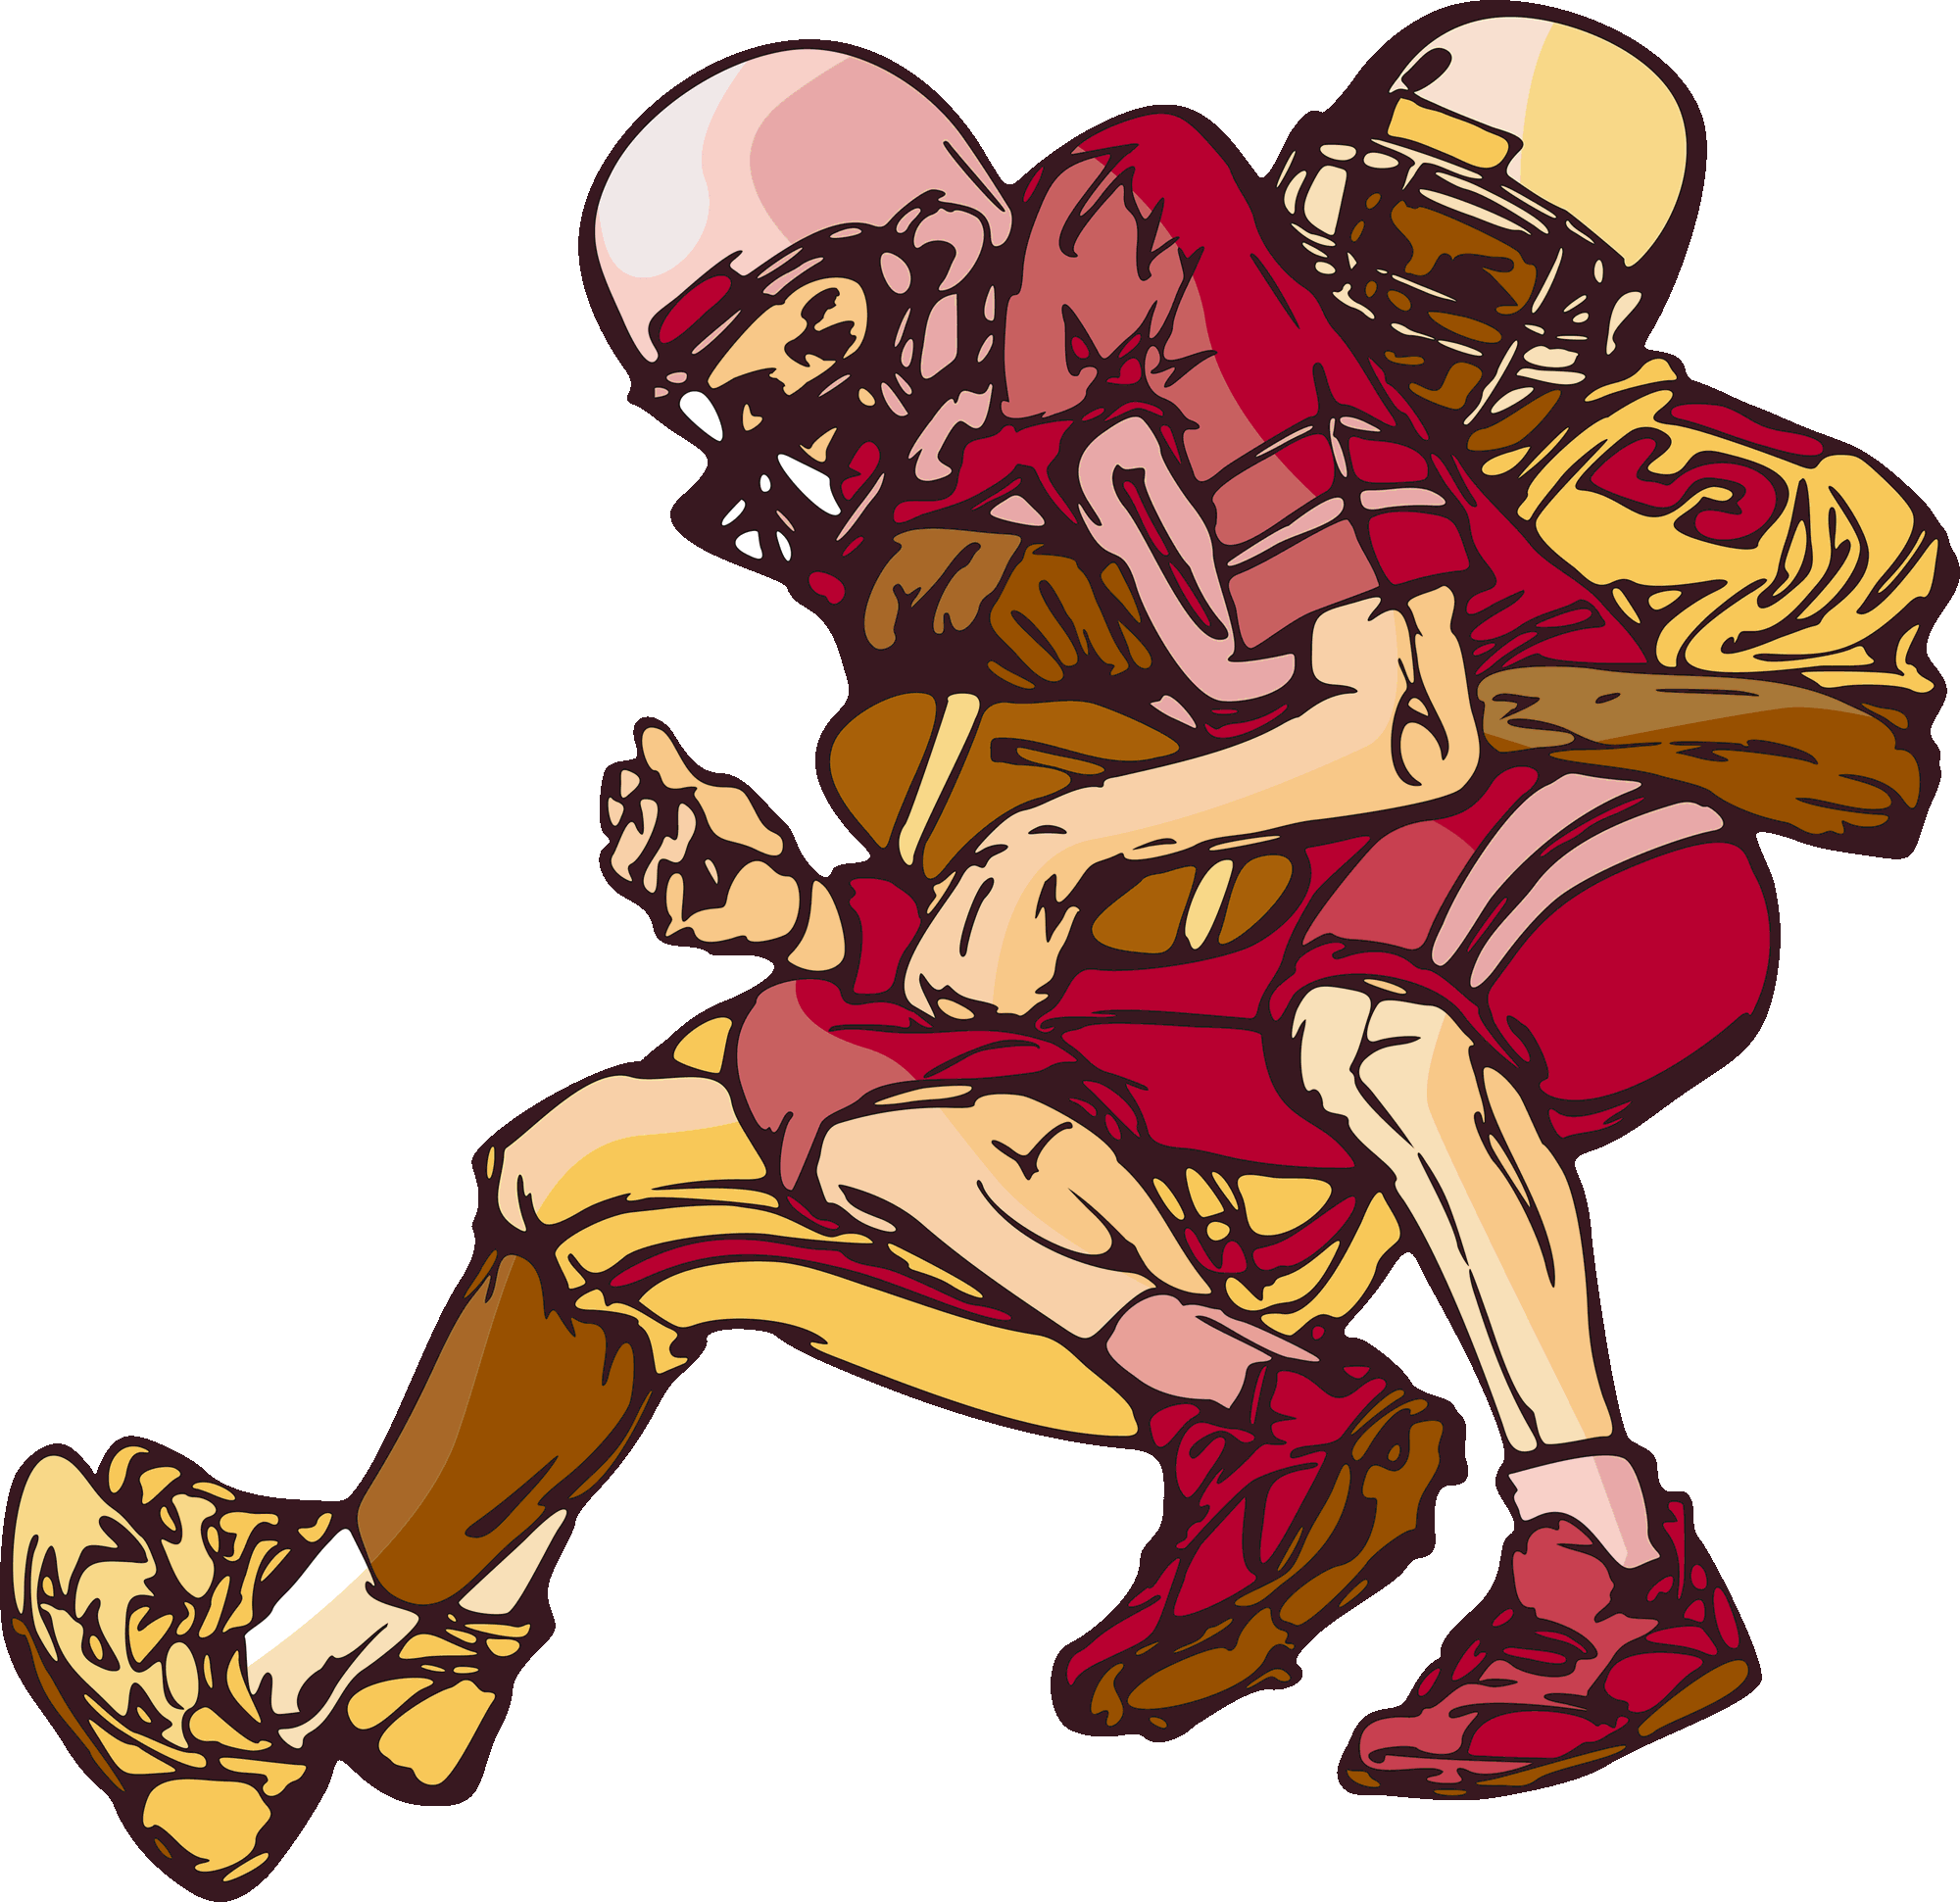 Football game clipart free